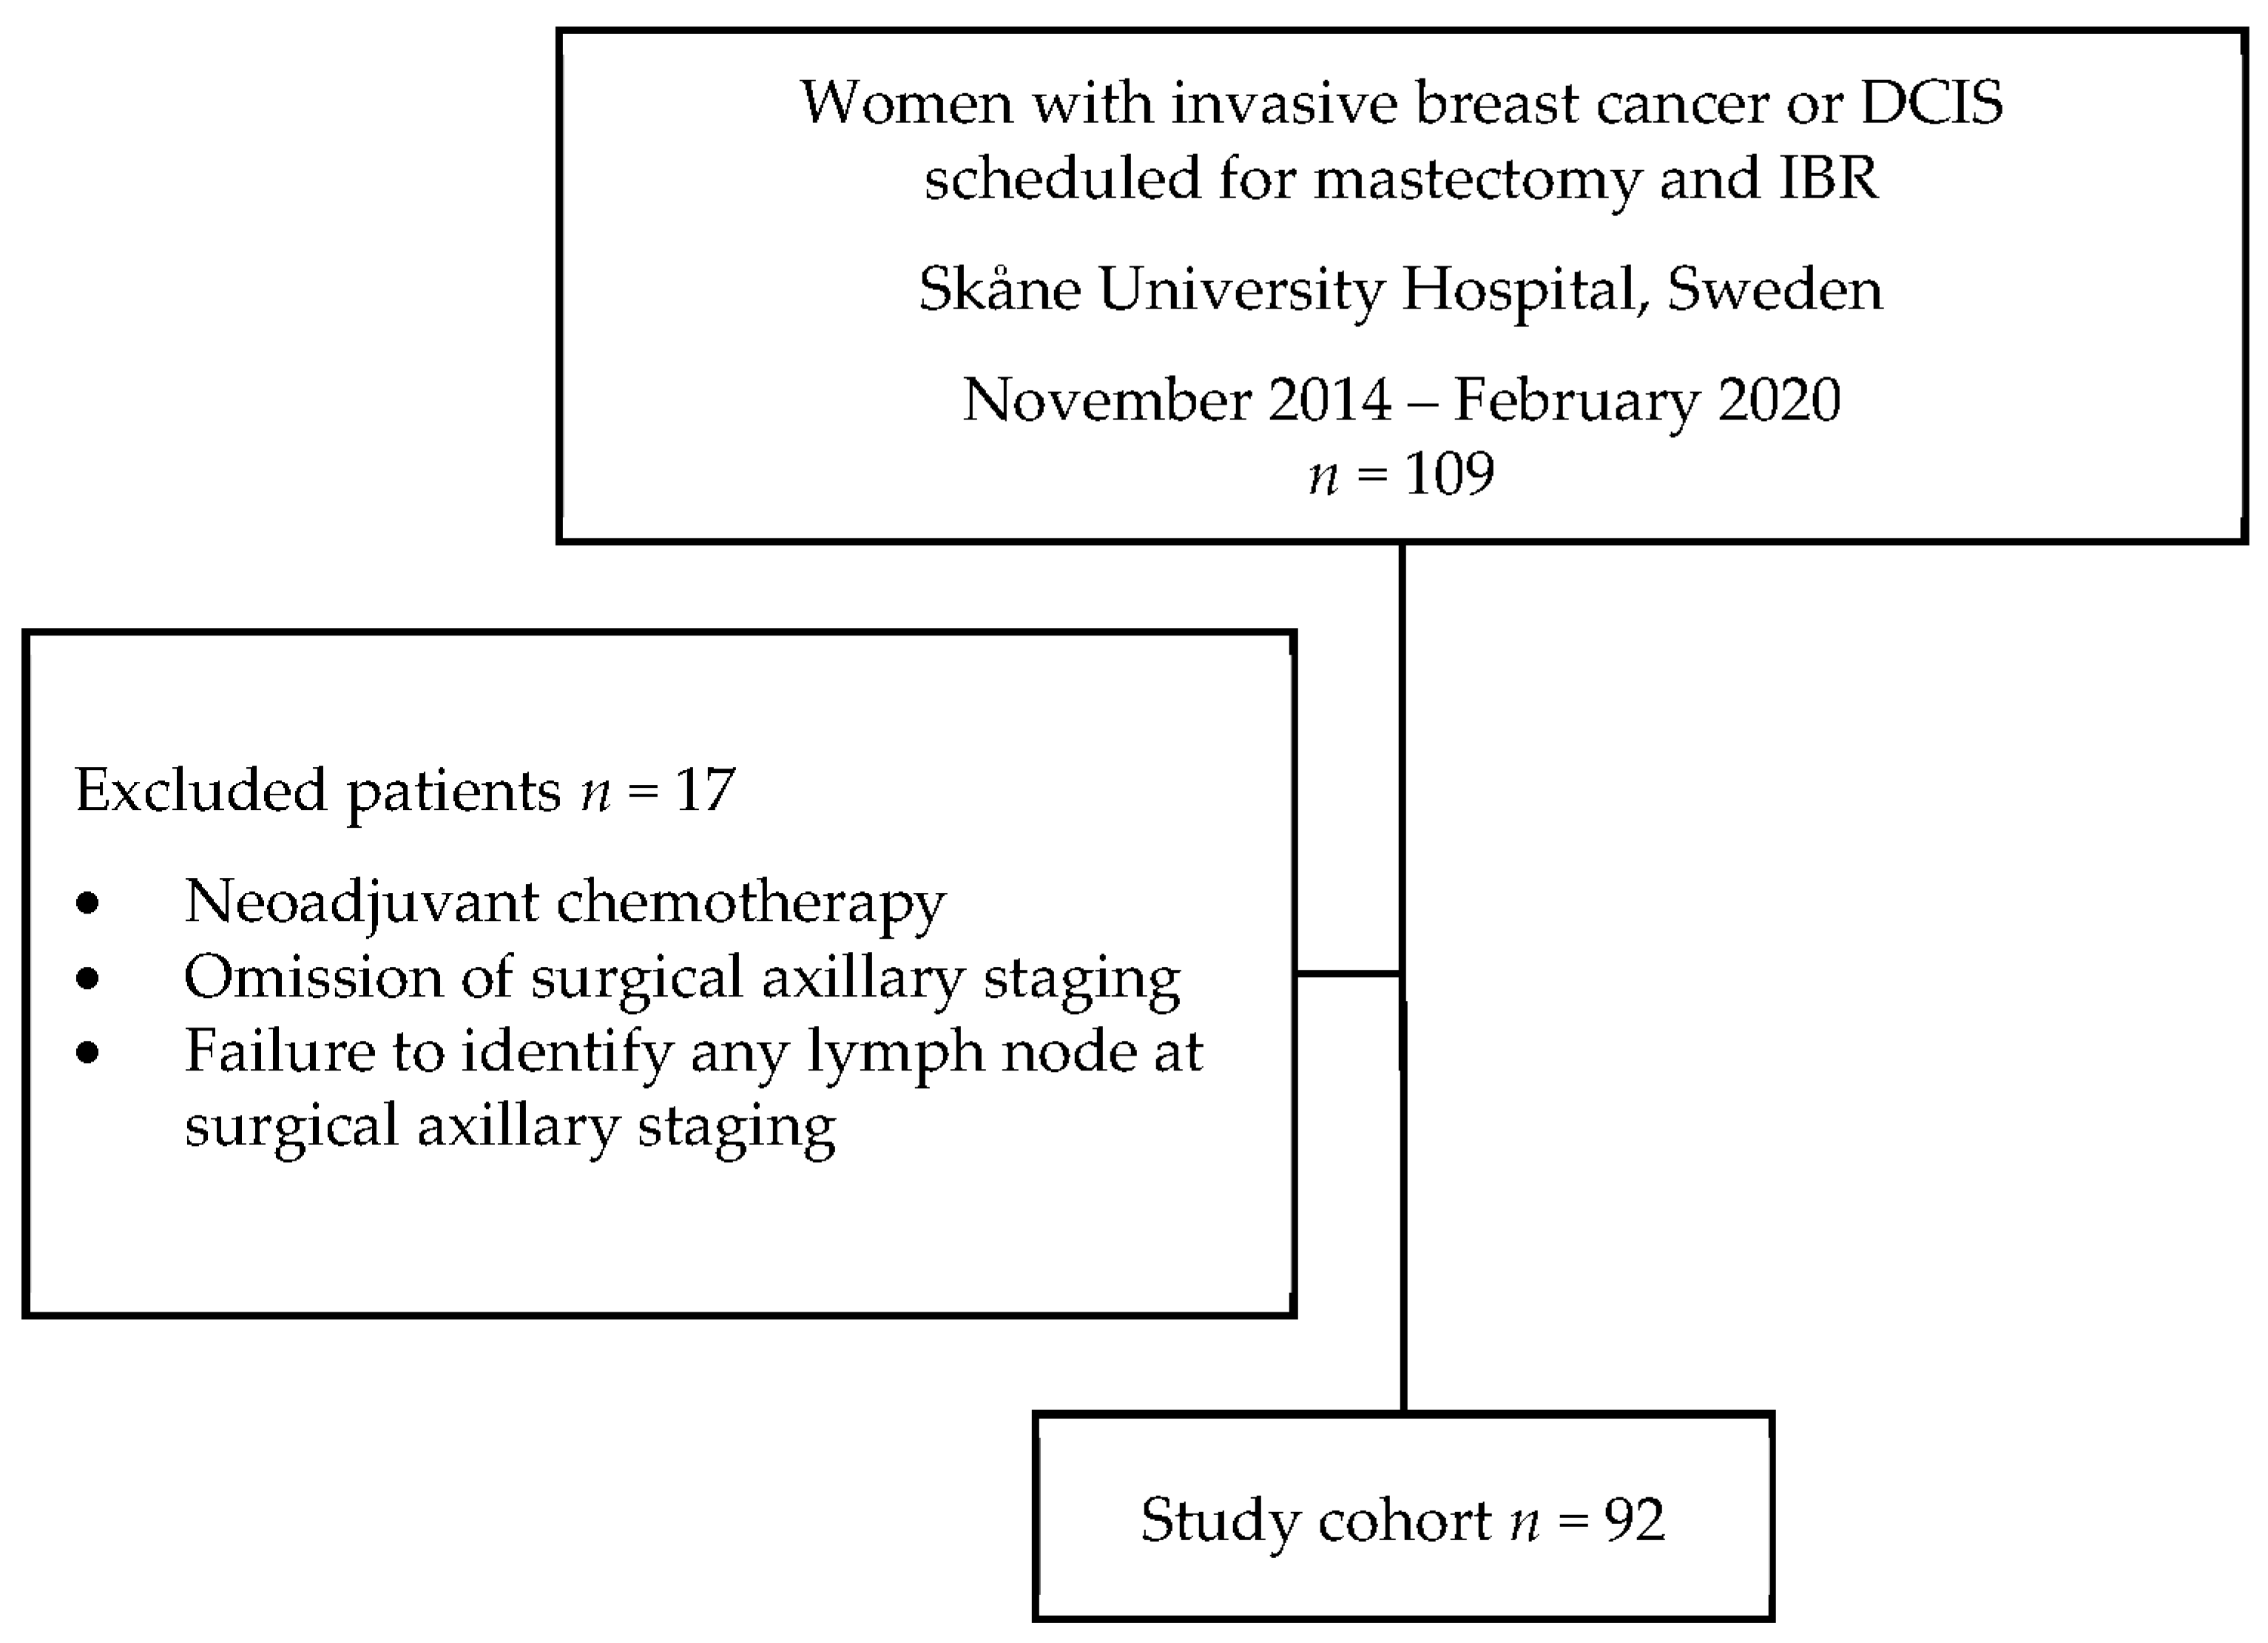 JPM Free Full-Text The Role of Surgical Axillary Staging Prior to Immediate Breast Reconstruction in the Era of De-Escalation of Axillary Management in Early Breast Cancer